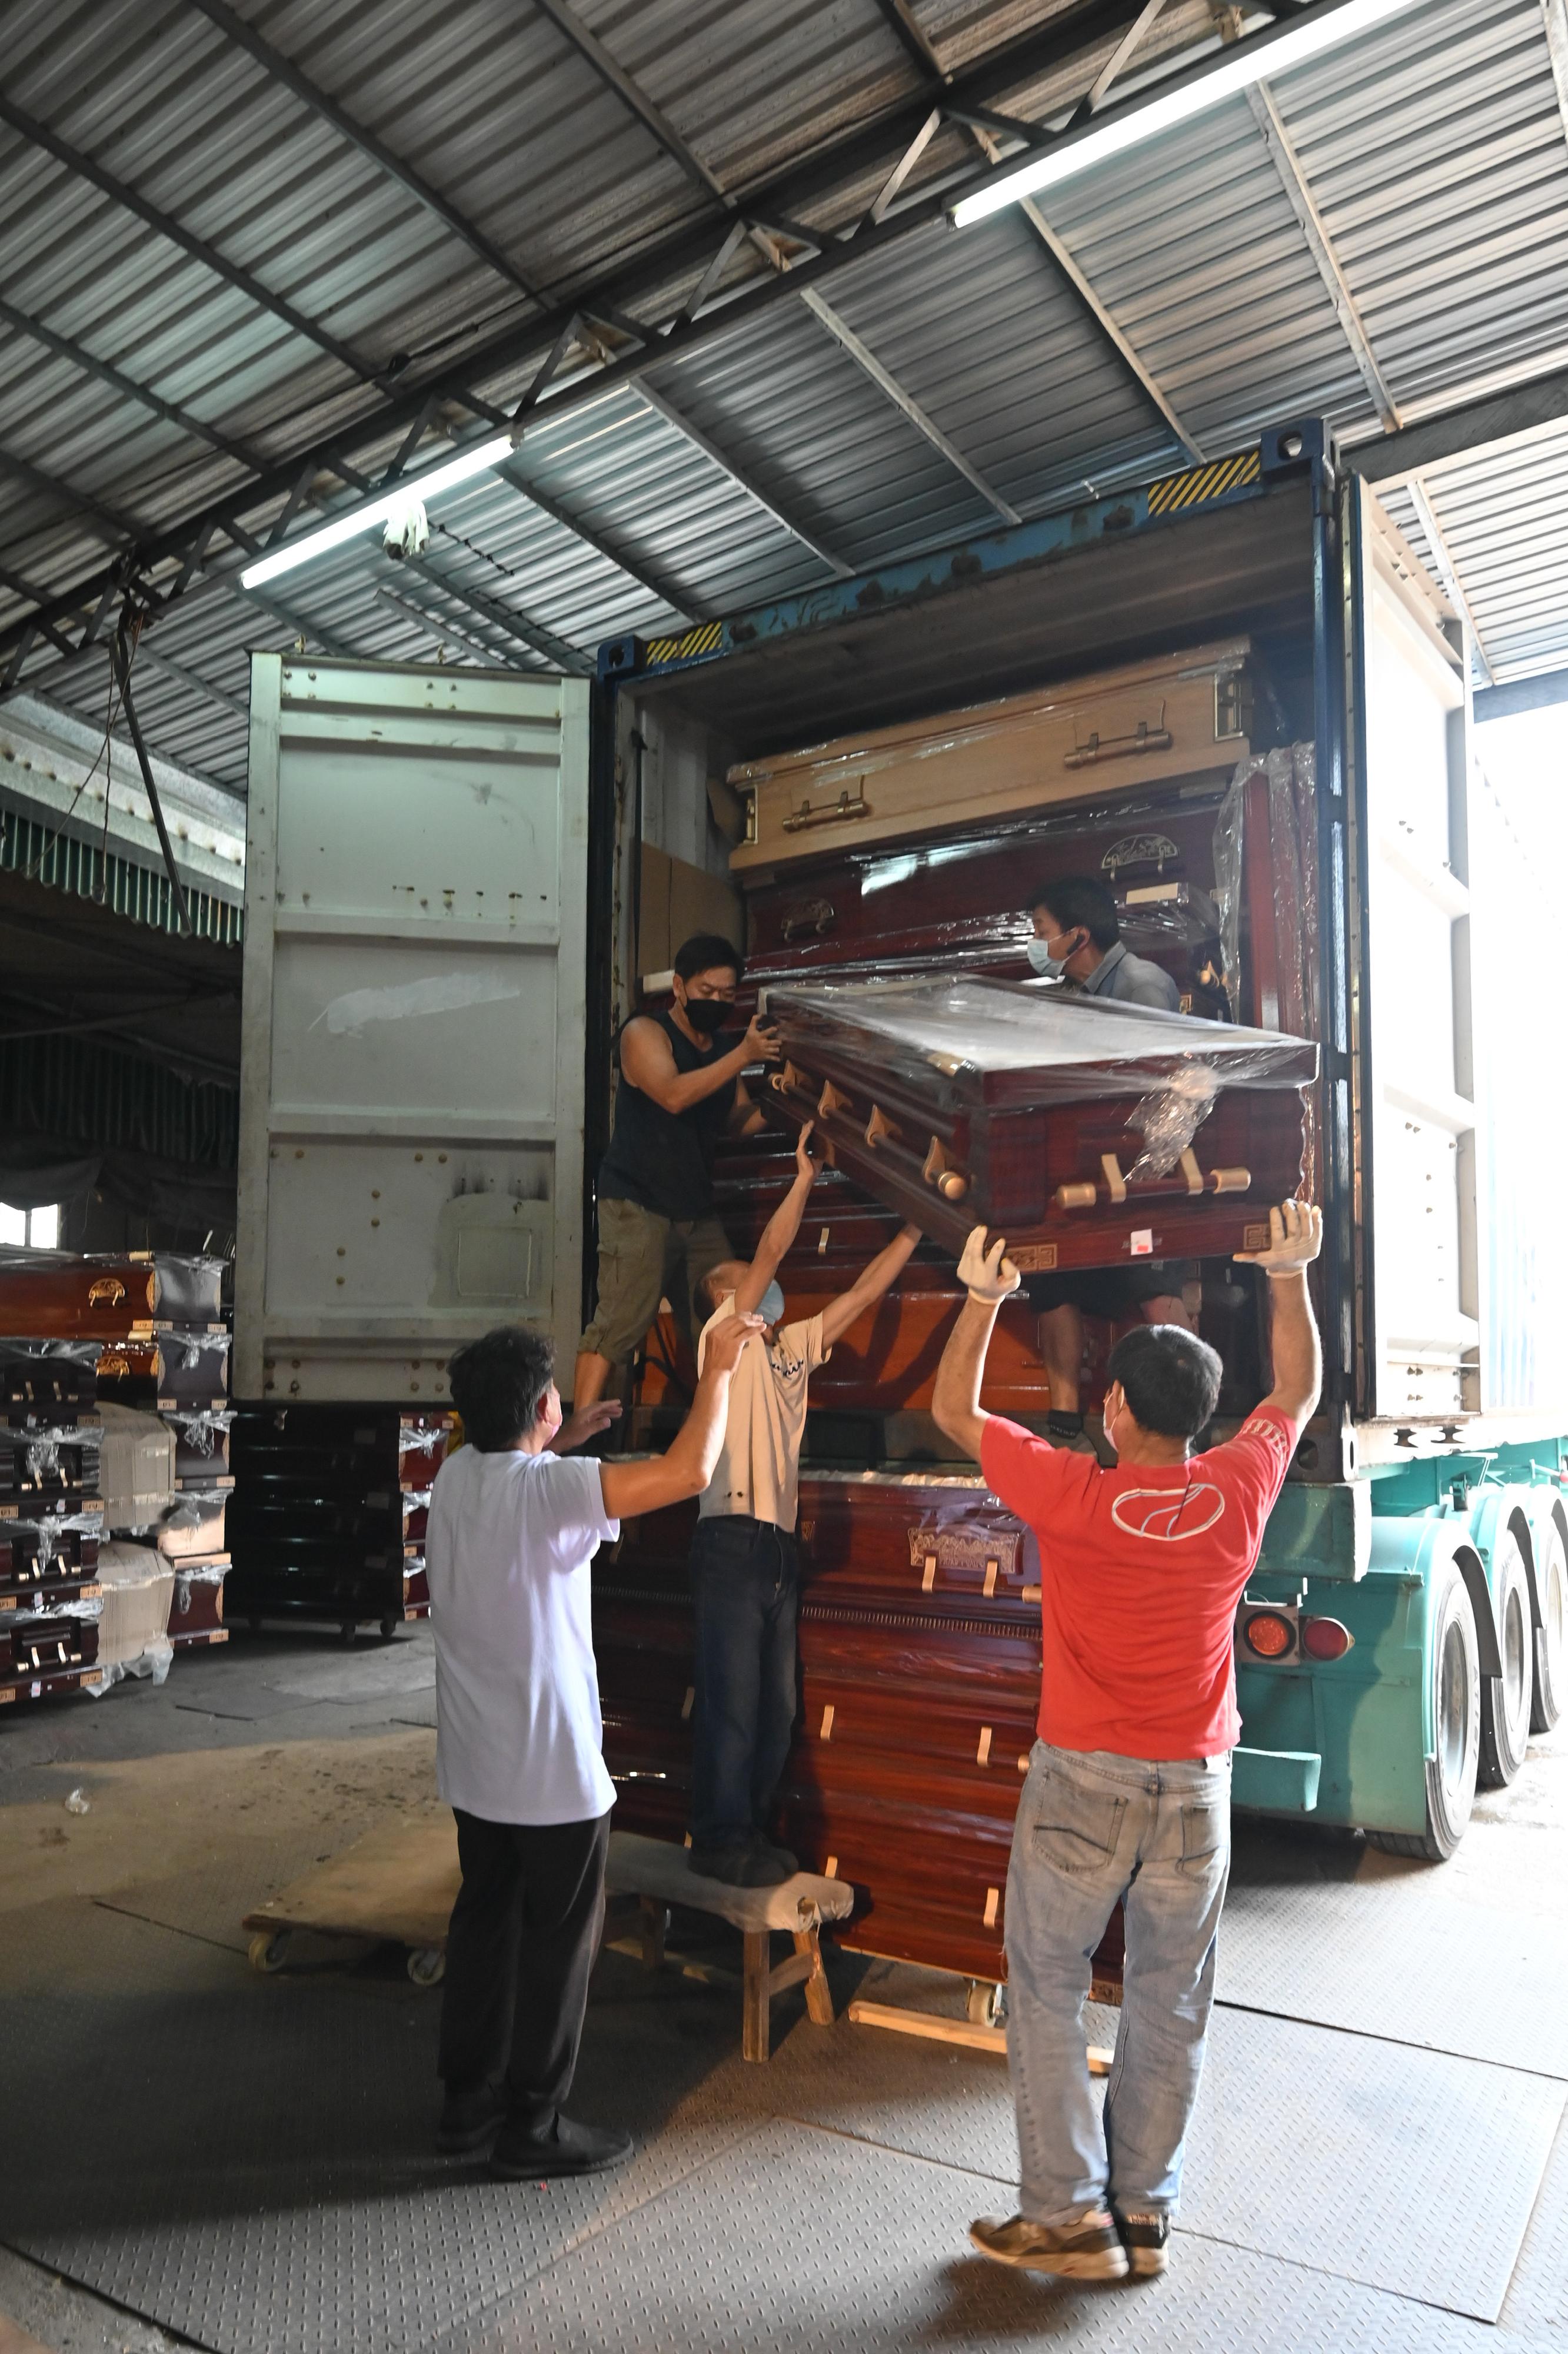 Pursuant to the co-ordination by the Government of the Hong Kong Special Administrative Region with relevant Mainland authorities on the quota on the cross-boundary goods vehicle trips and sea freight arrangements for the supply of coffins to Hong Kong, around 330 coffins have arrived in Hong Kong via sea and land today (March 18). Photo shows workers handling incoming coffins.